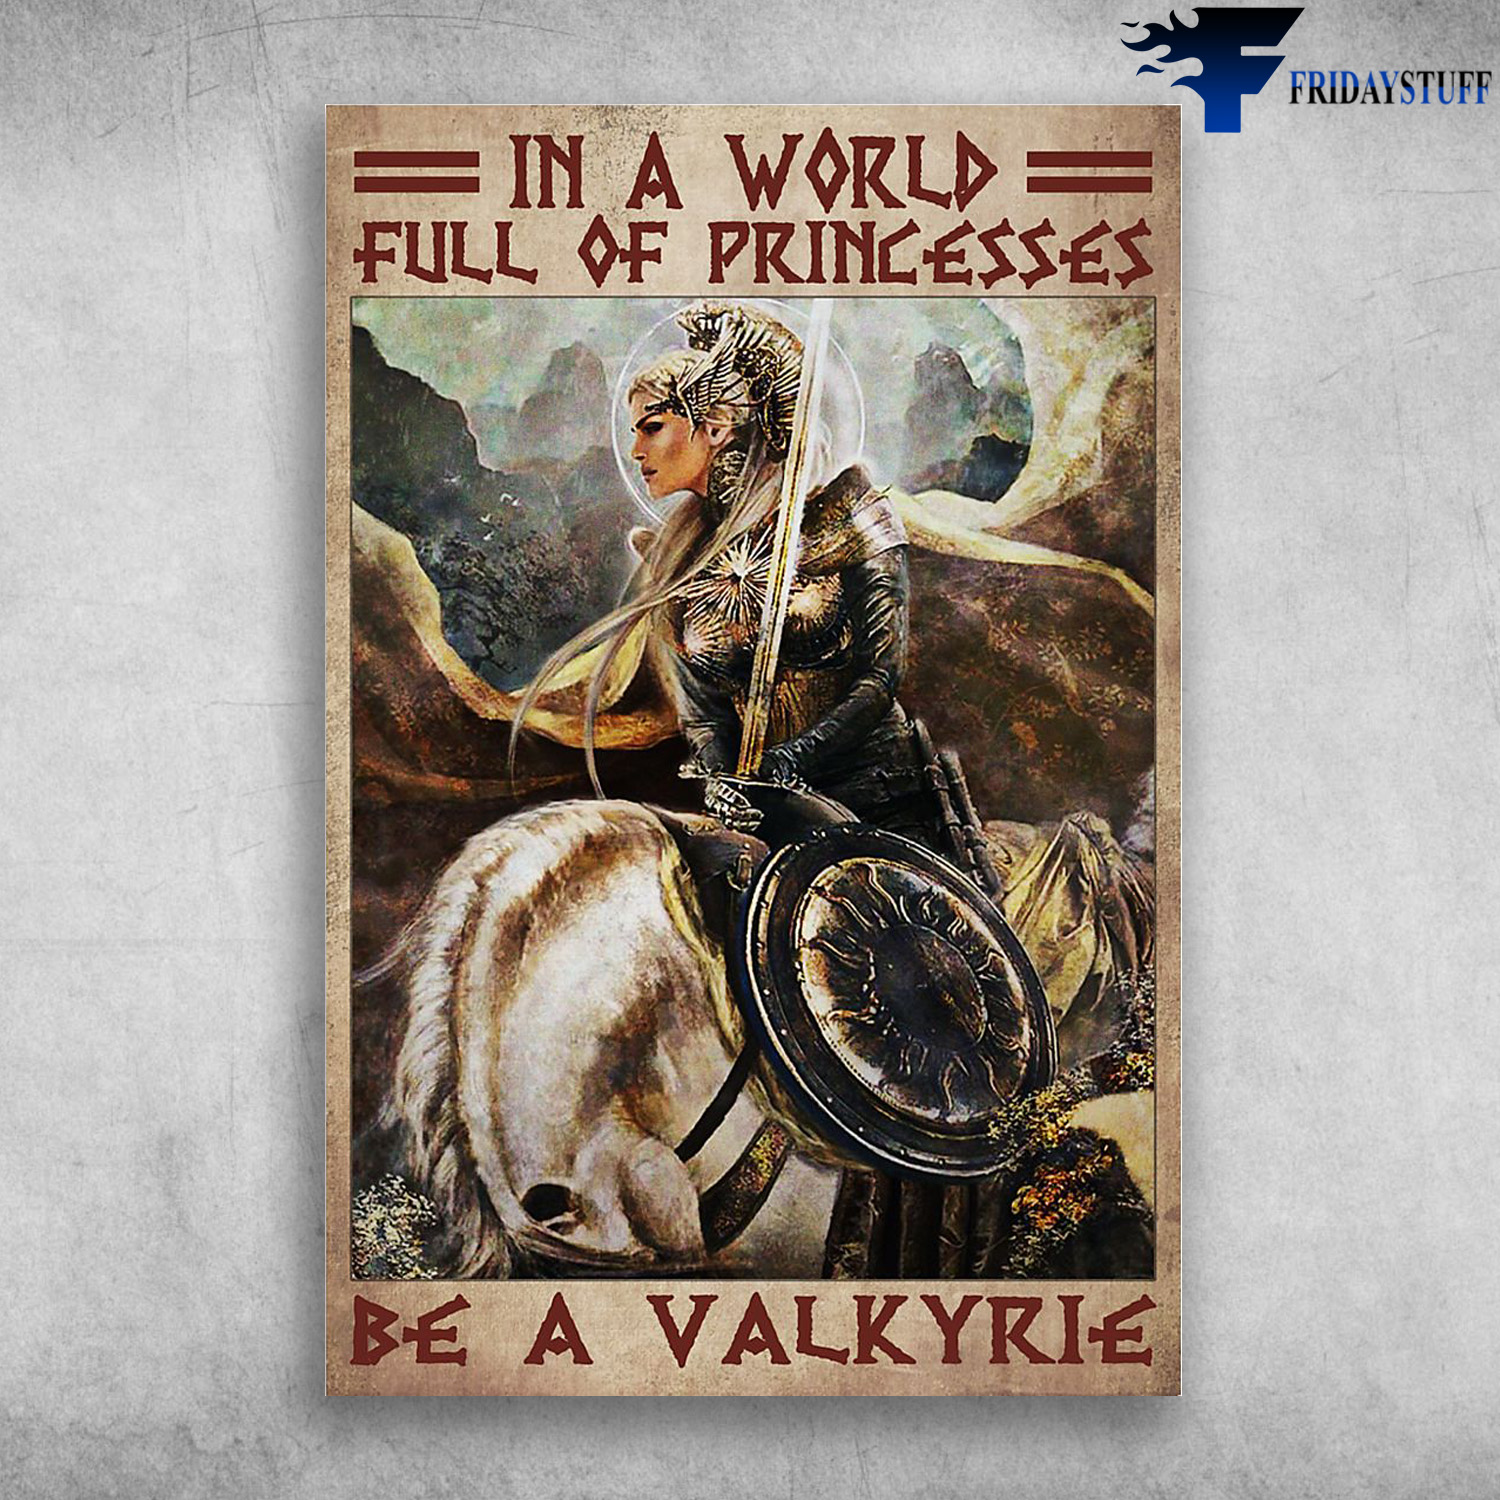 Valkyrie Holding The Sword - In A World Full Of Princesses, Be A Valkyrie